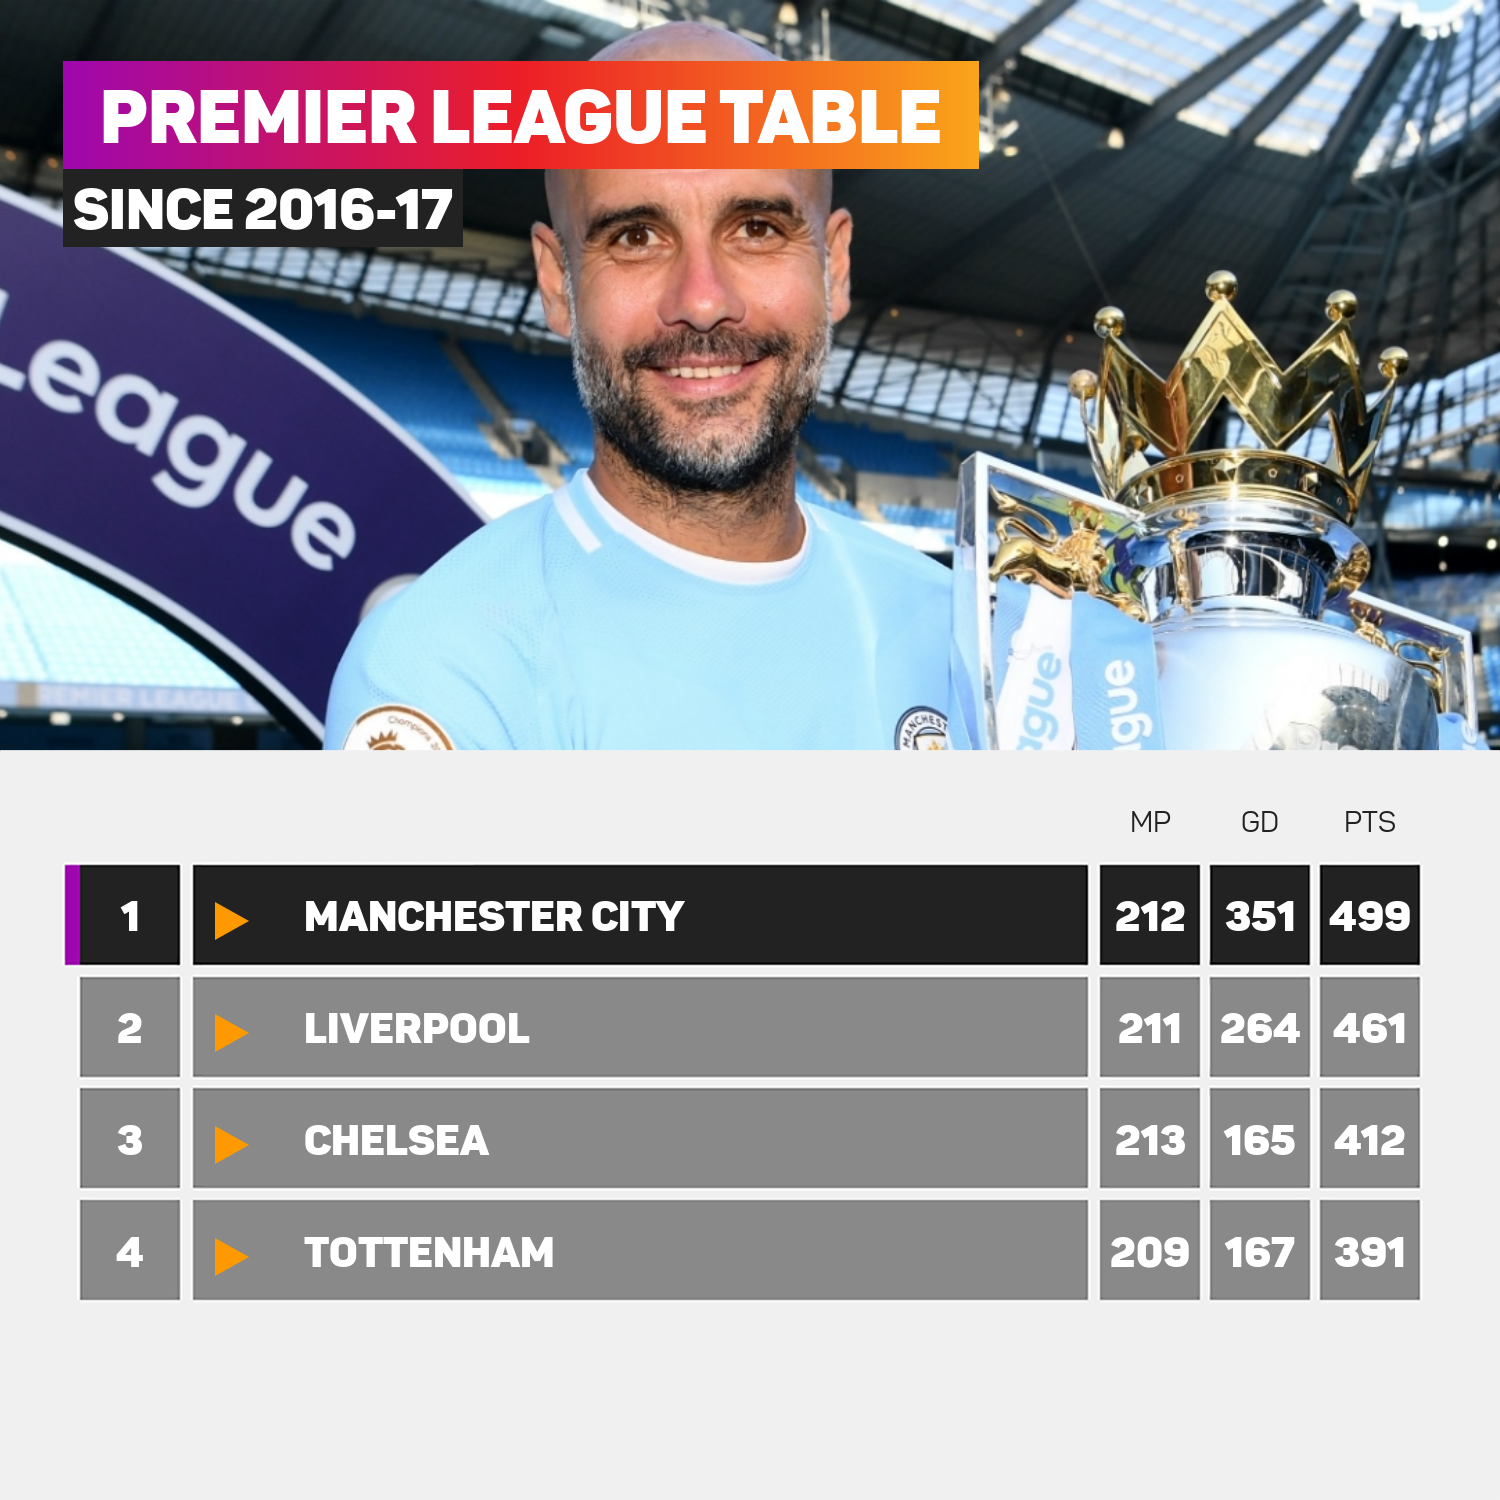 Premier League table since Pep Guardiola took charge, as of 21012022